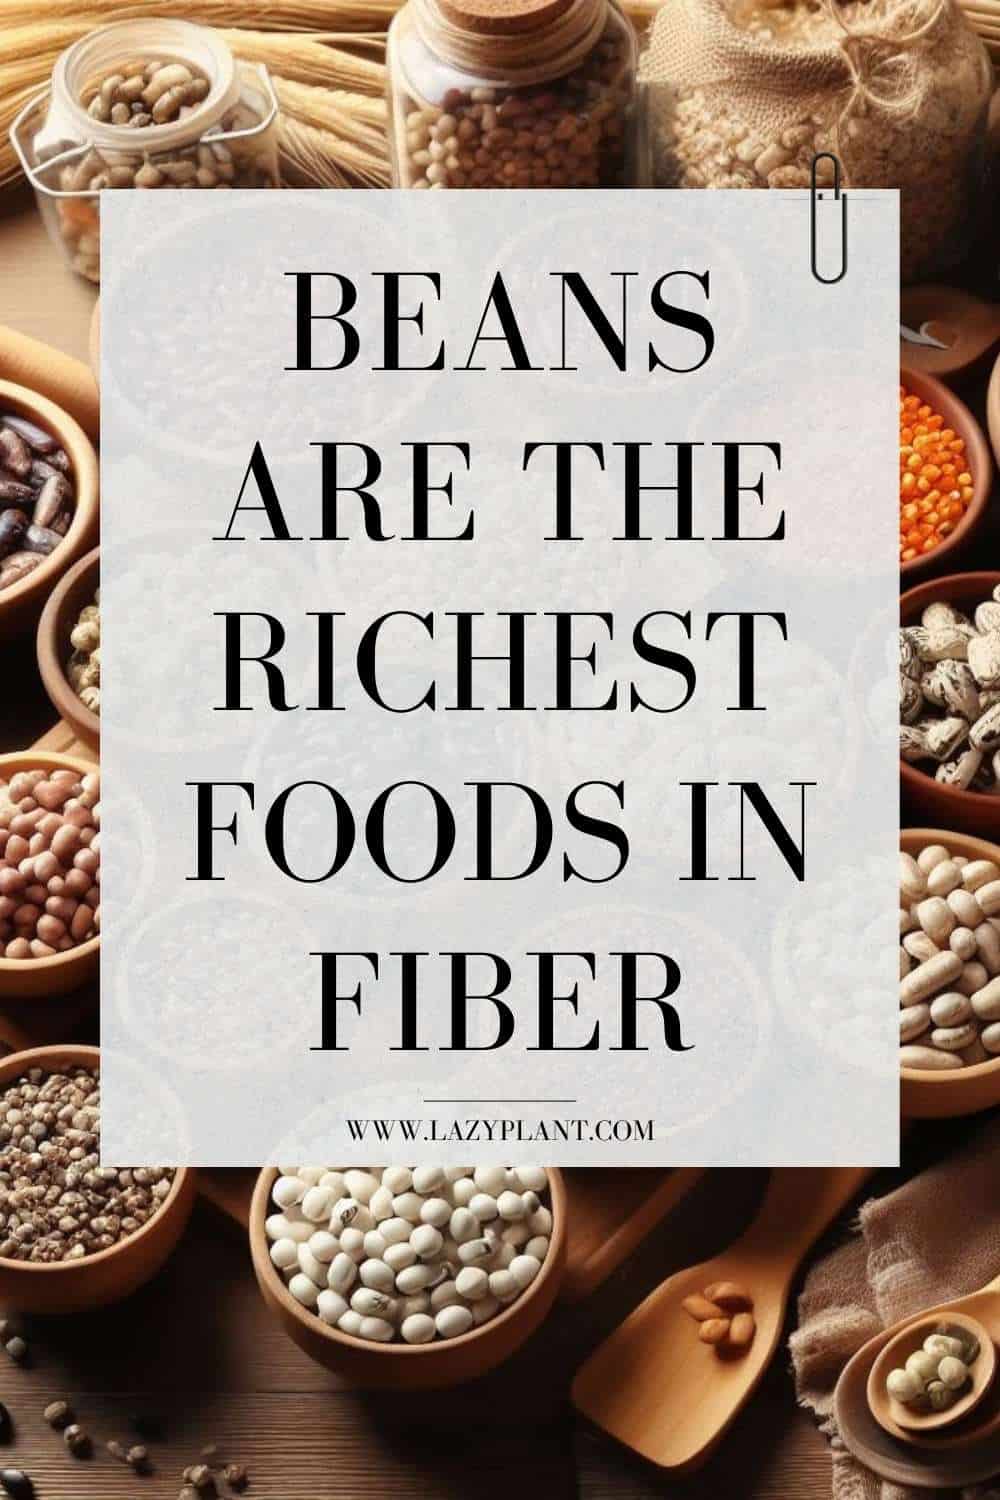 Beans are the richest foods in Fiber.